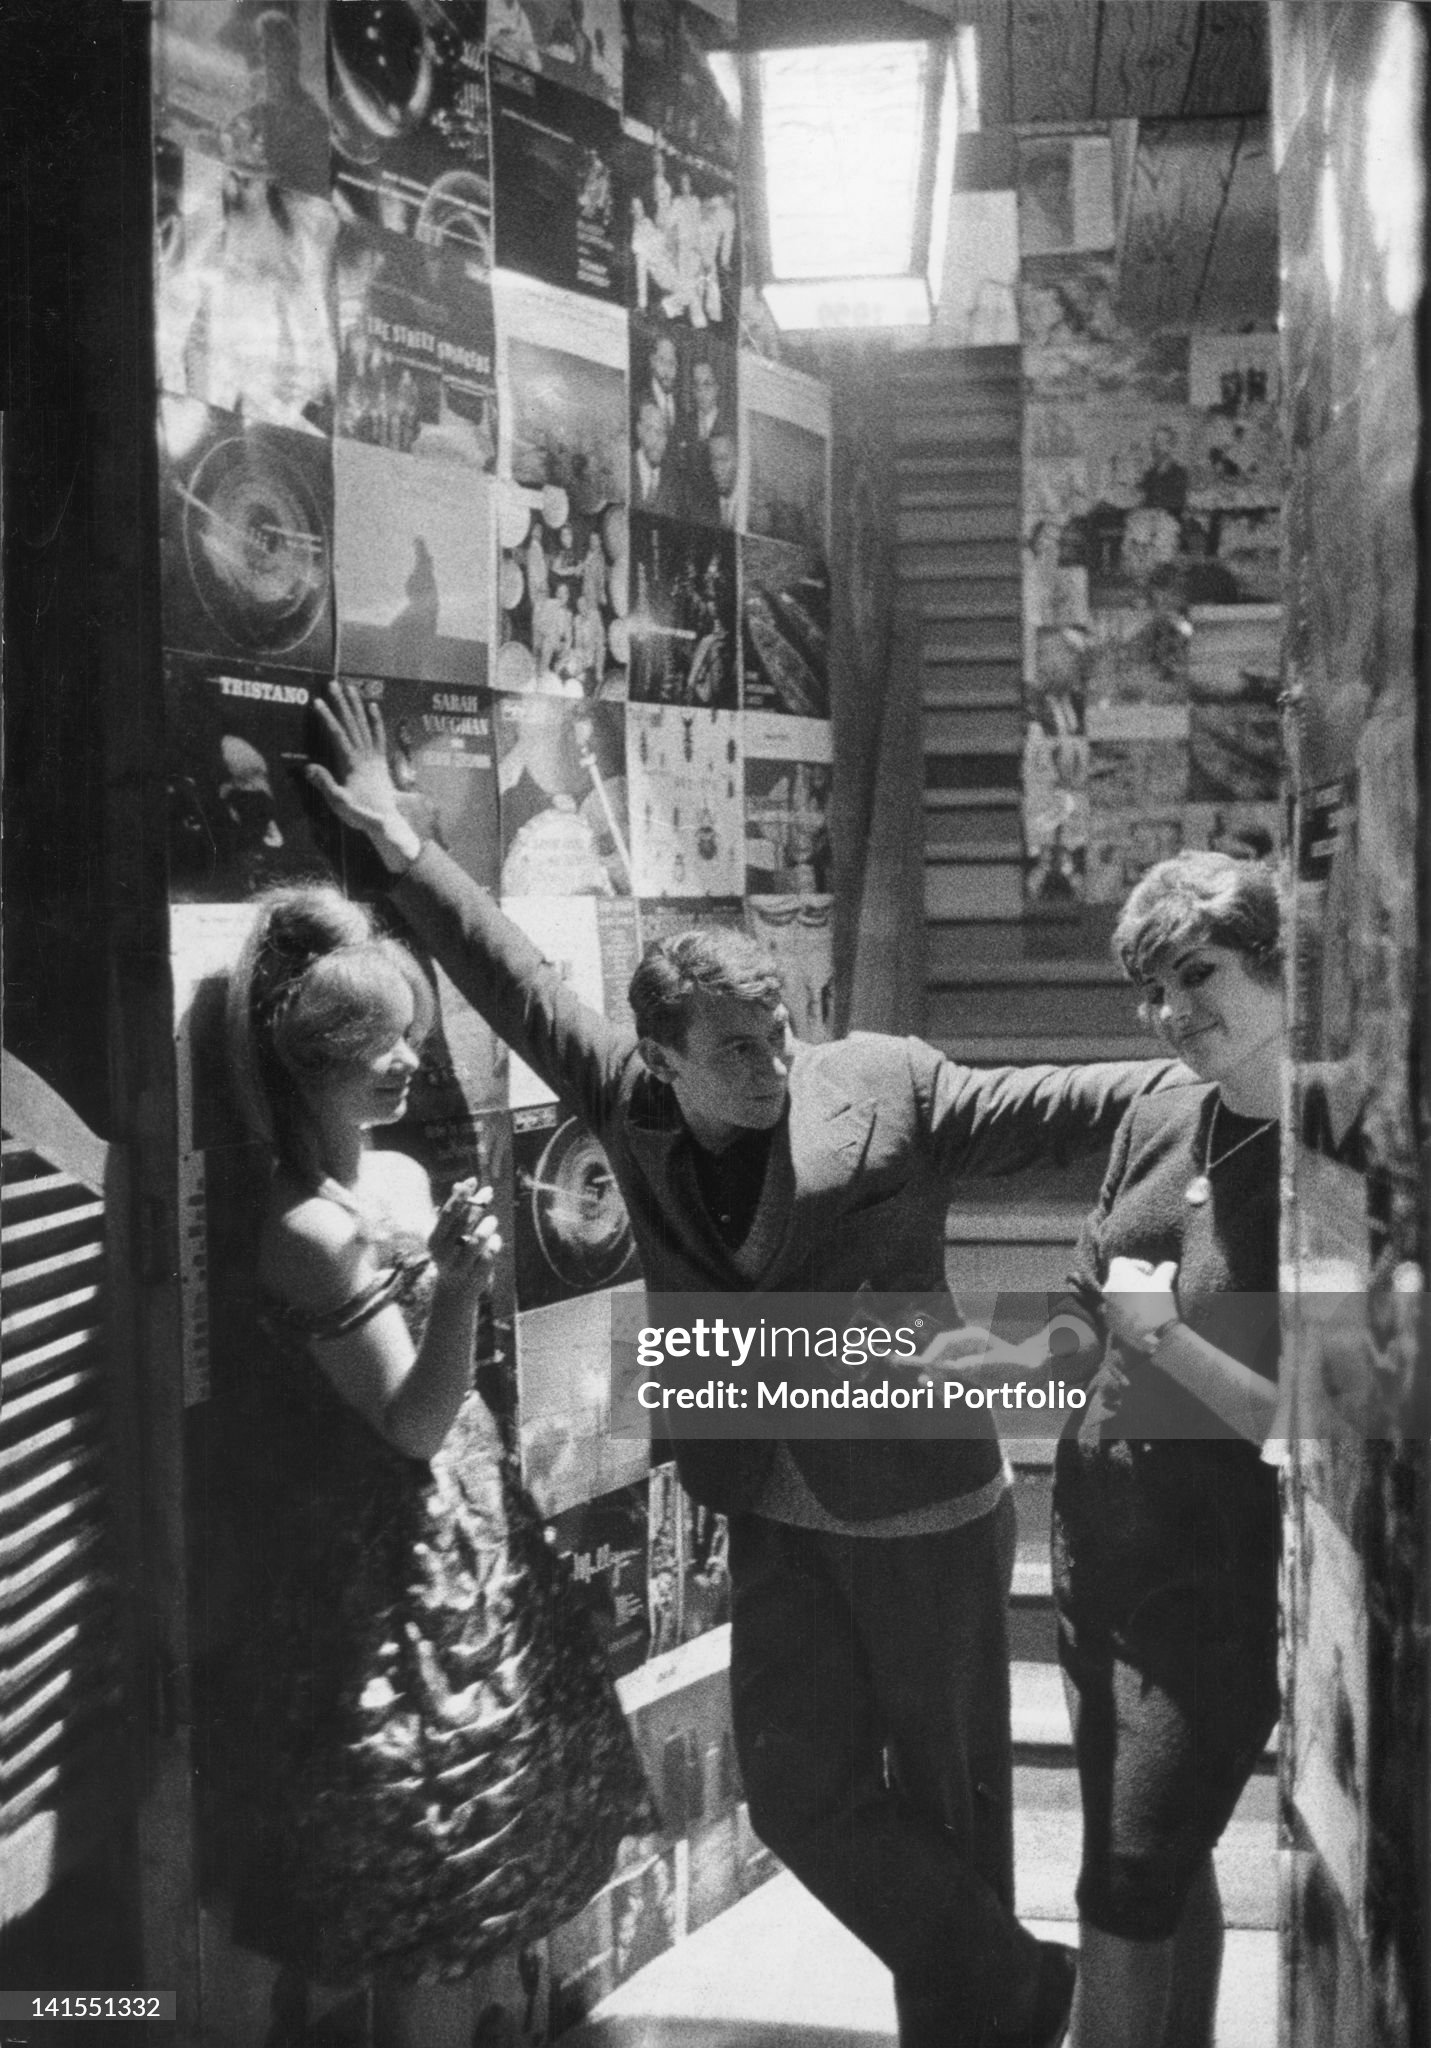 An Italian boy and two Italian girls standing in a corridor of 'Santa Tecla' nightclub in Milan on 11 December 1959. The walls are plastered over with records' covers. 